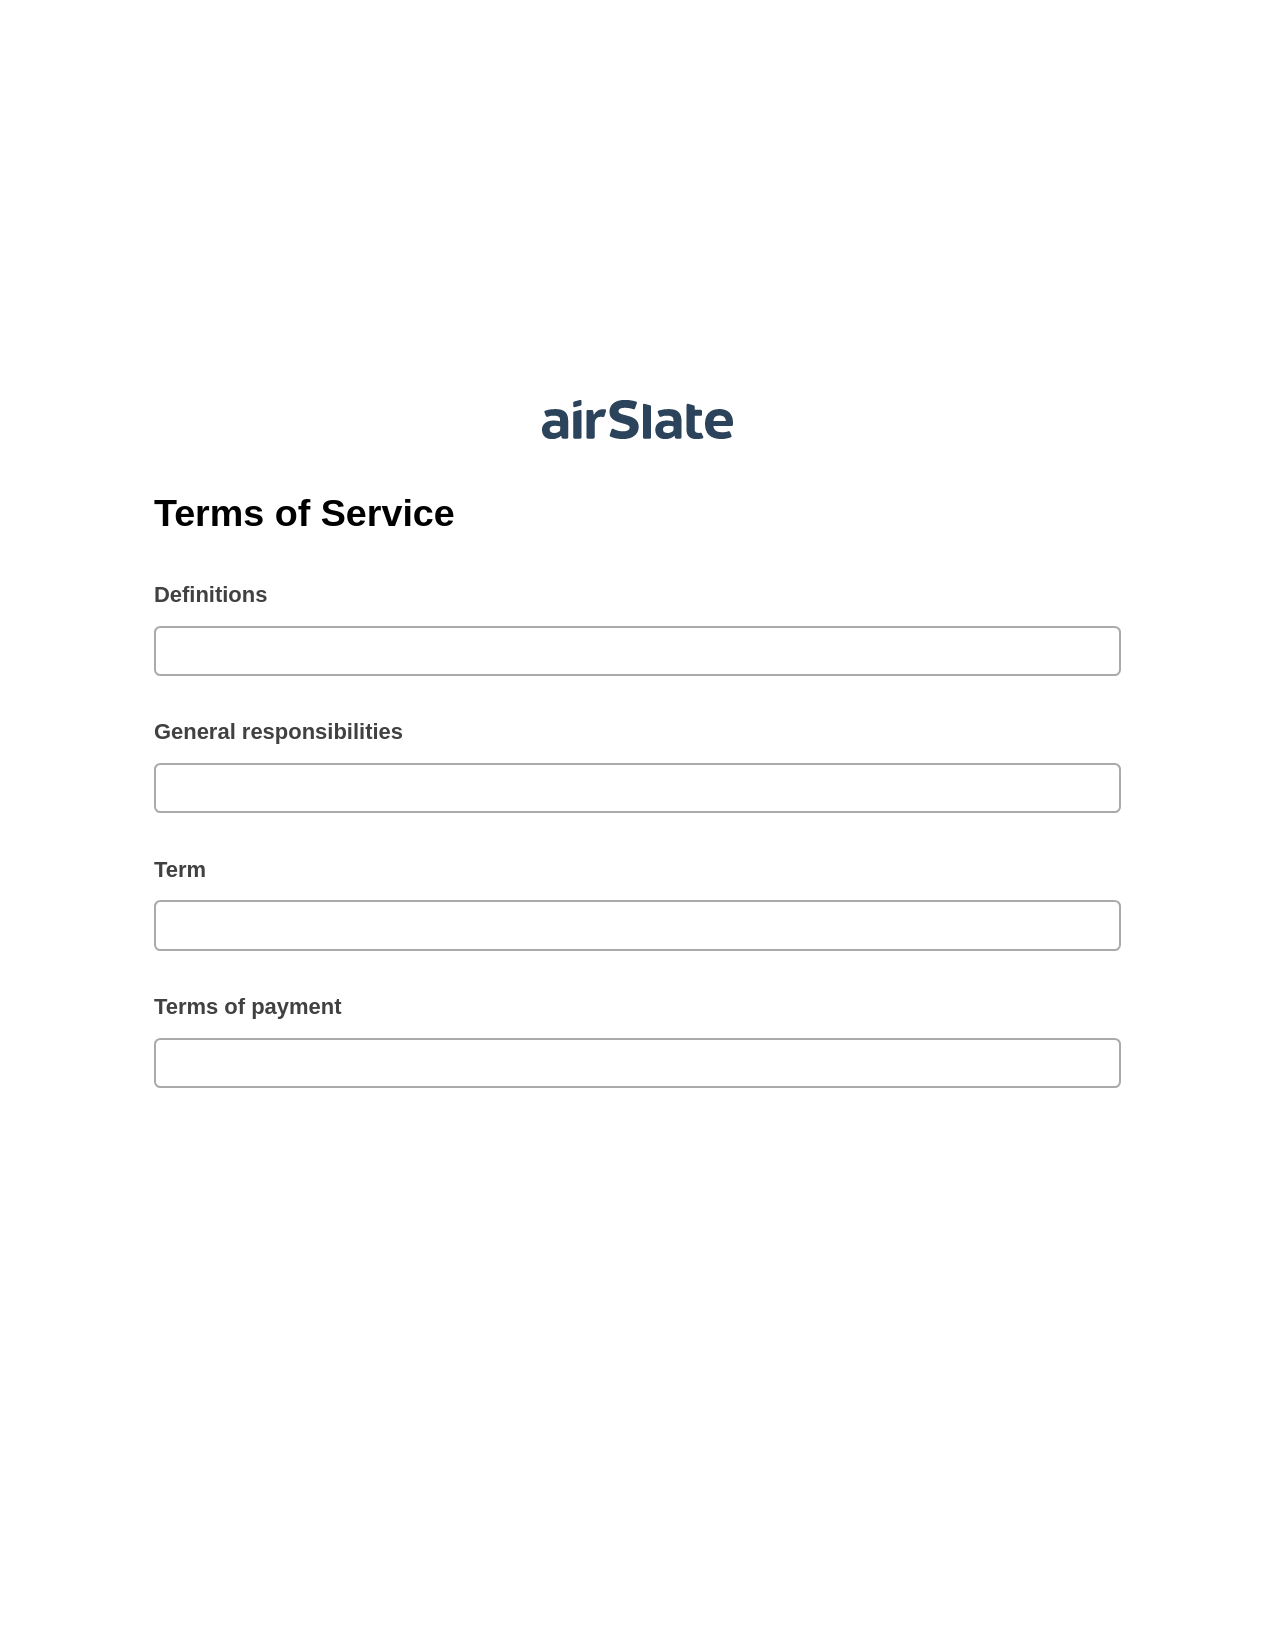 Terms of Service Pre-fill from Salesforce Record Bot, Remove Slate Bot, Post-finish Document Bot